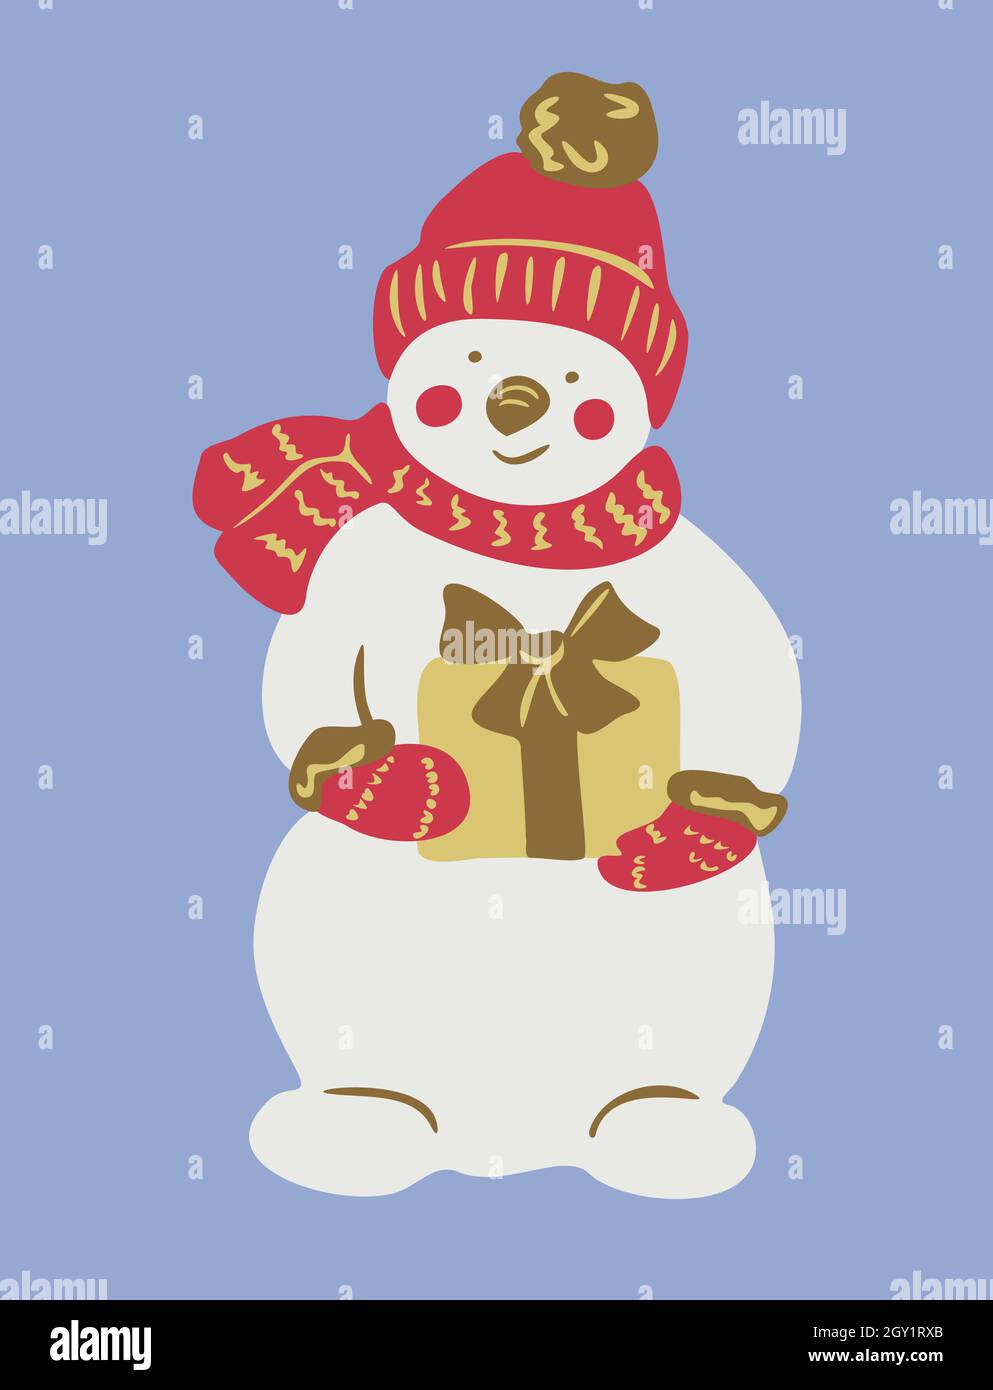 Vector illustration of snowman with present in his hands. Isolated snowman is wearing cap, scarf and gloves. Stock Vector